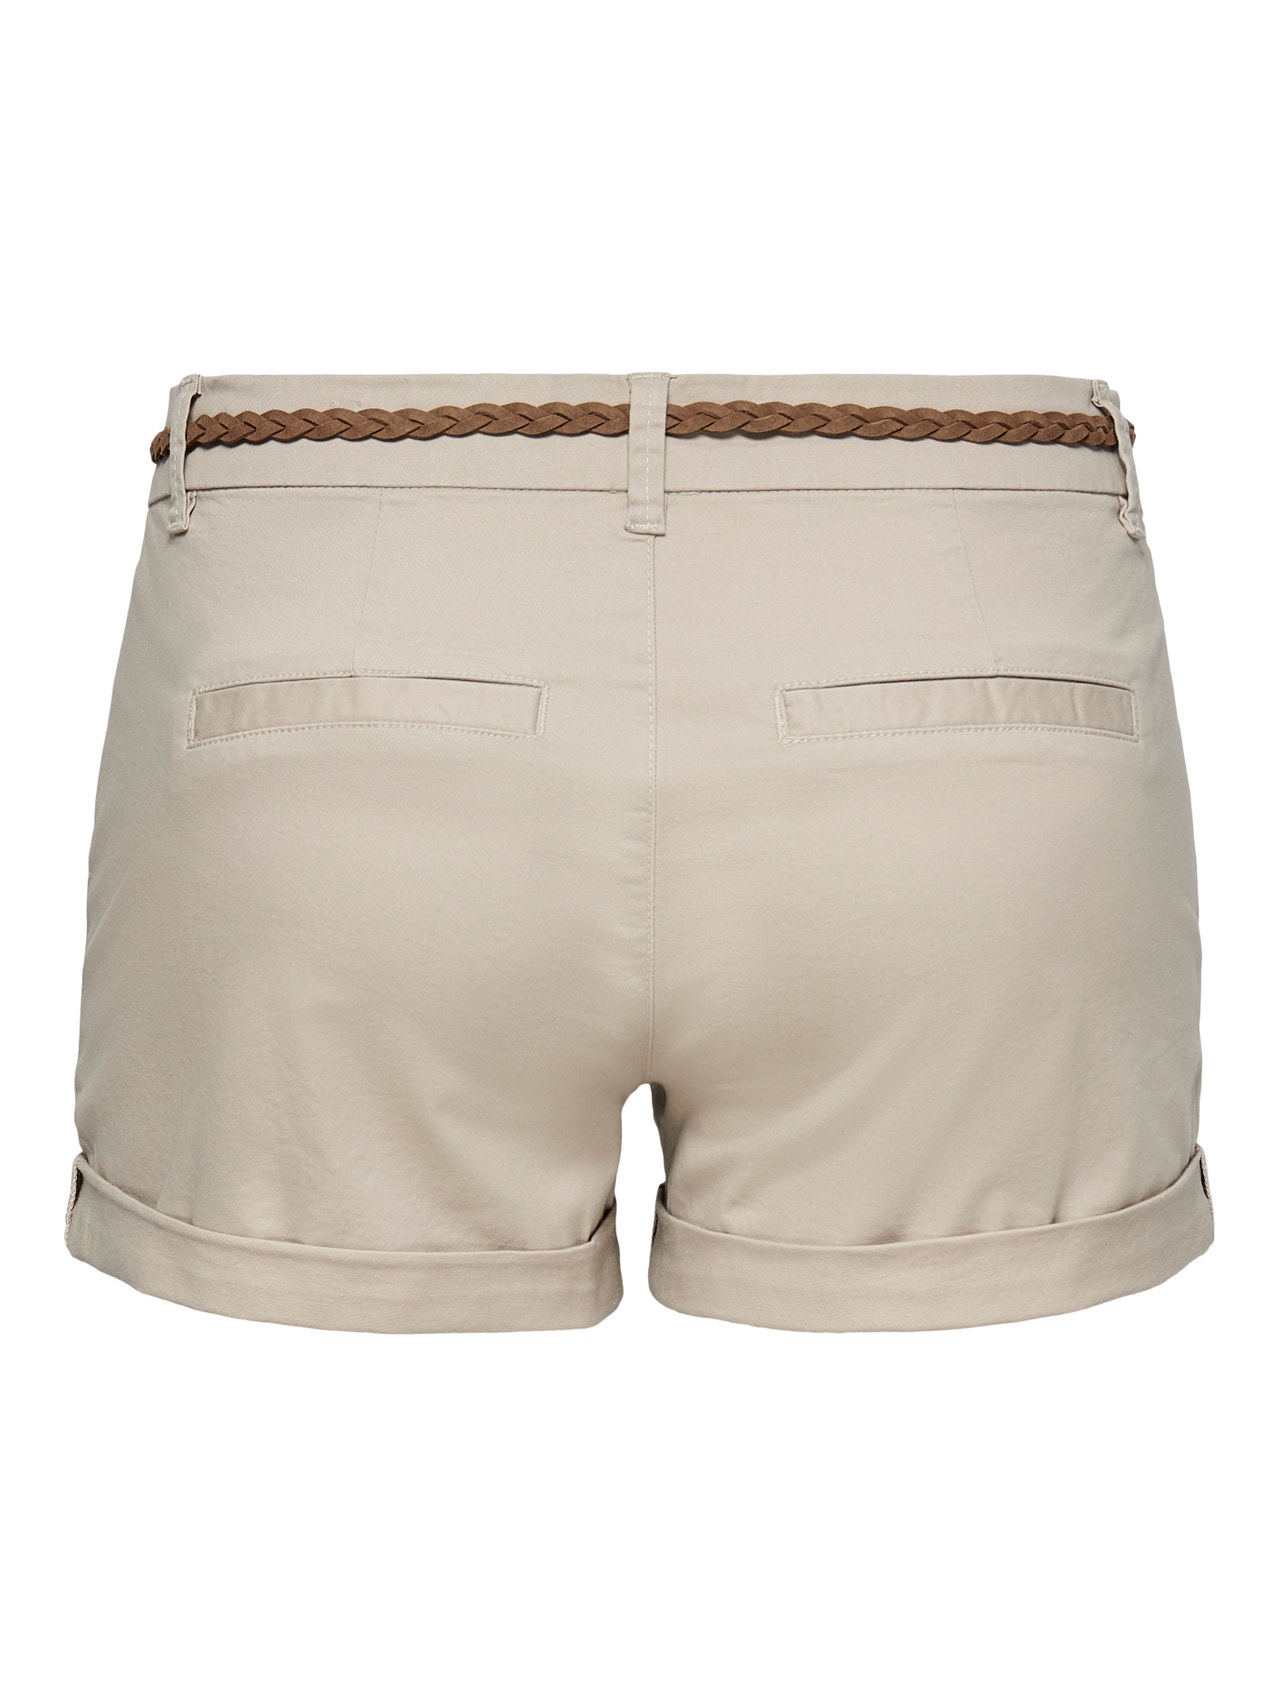 ONLY Belte Chinoshorts -Pure Cashmere - 15134246